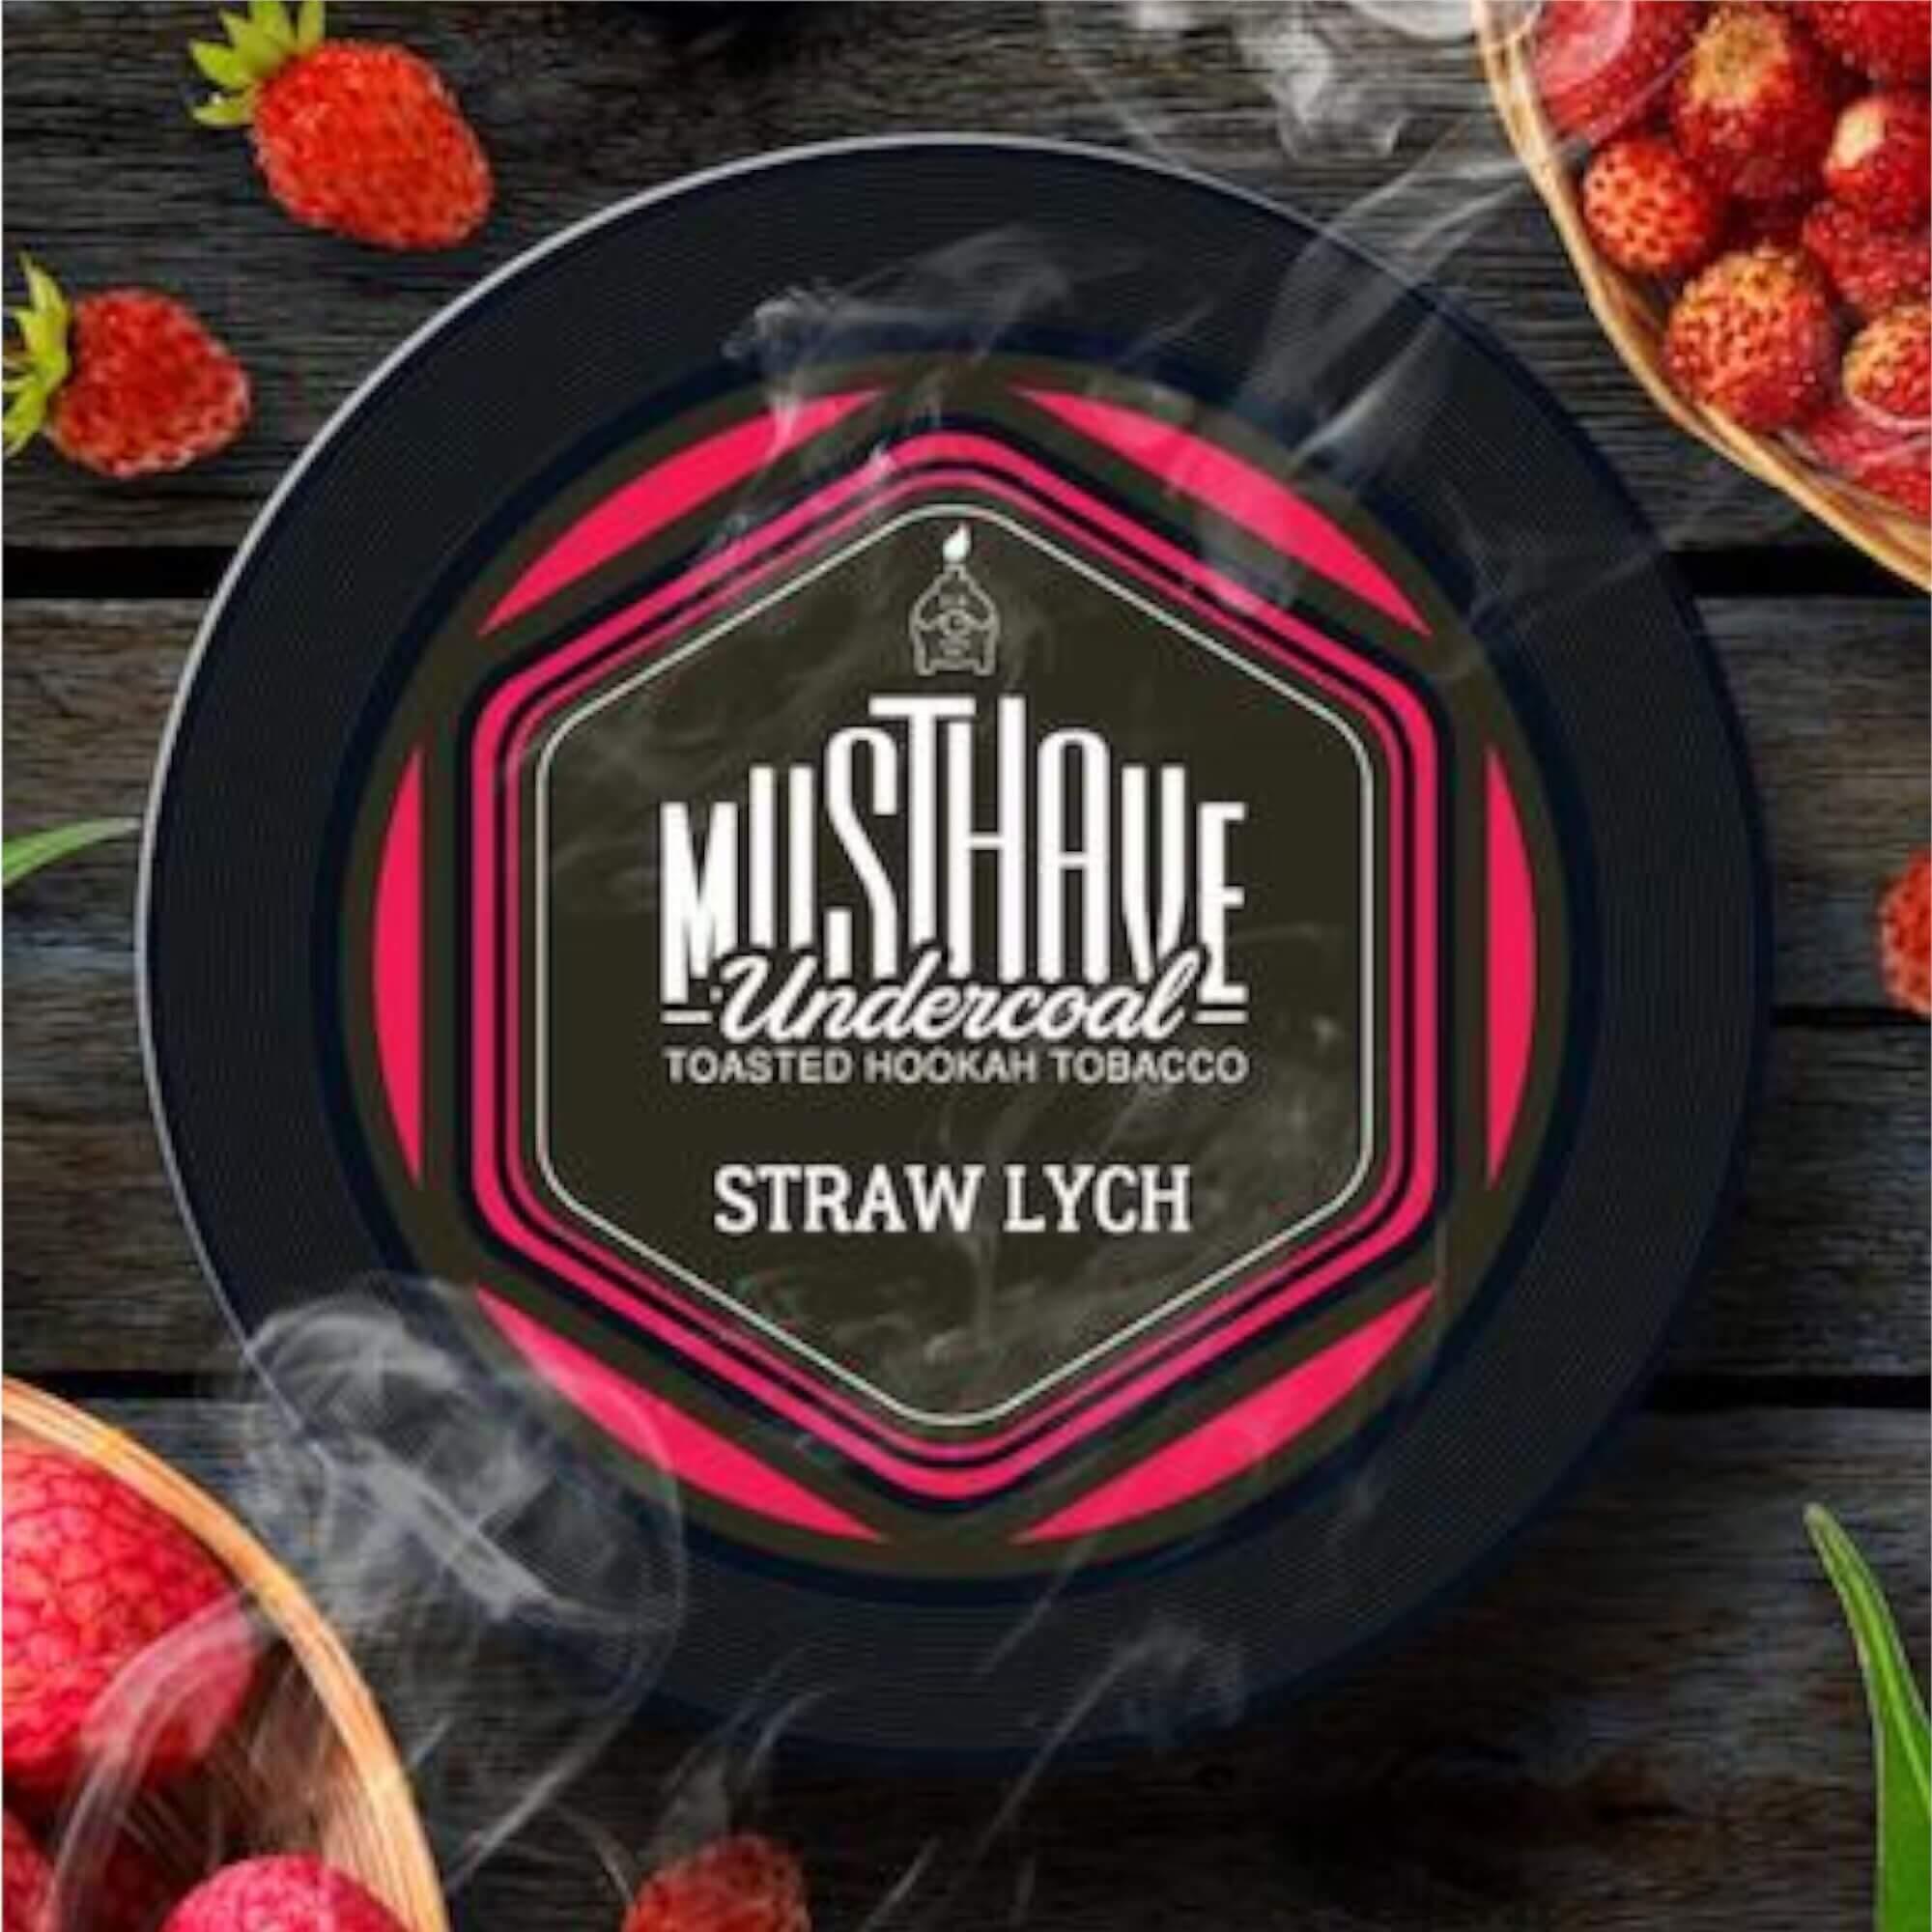 Musthave - Straw Lych 200g